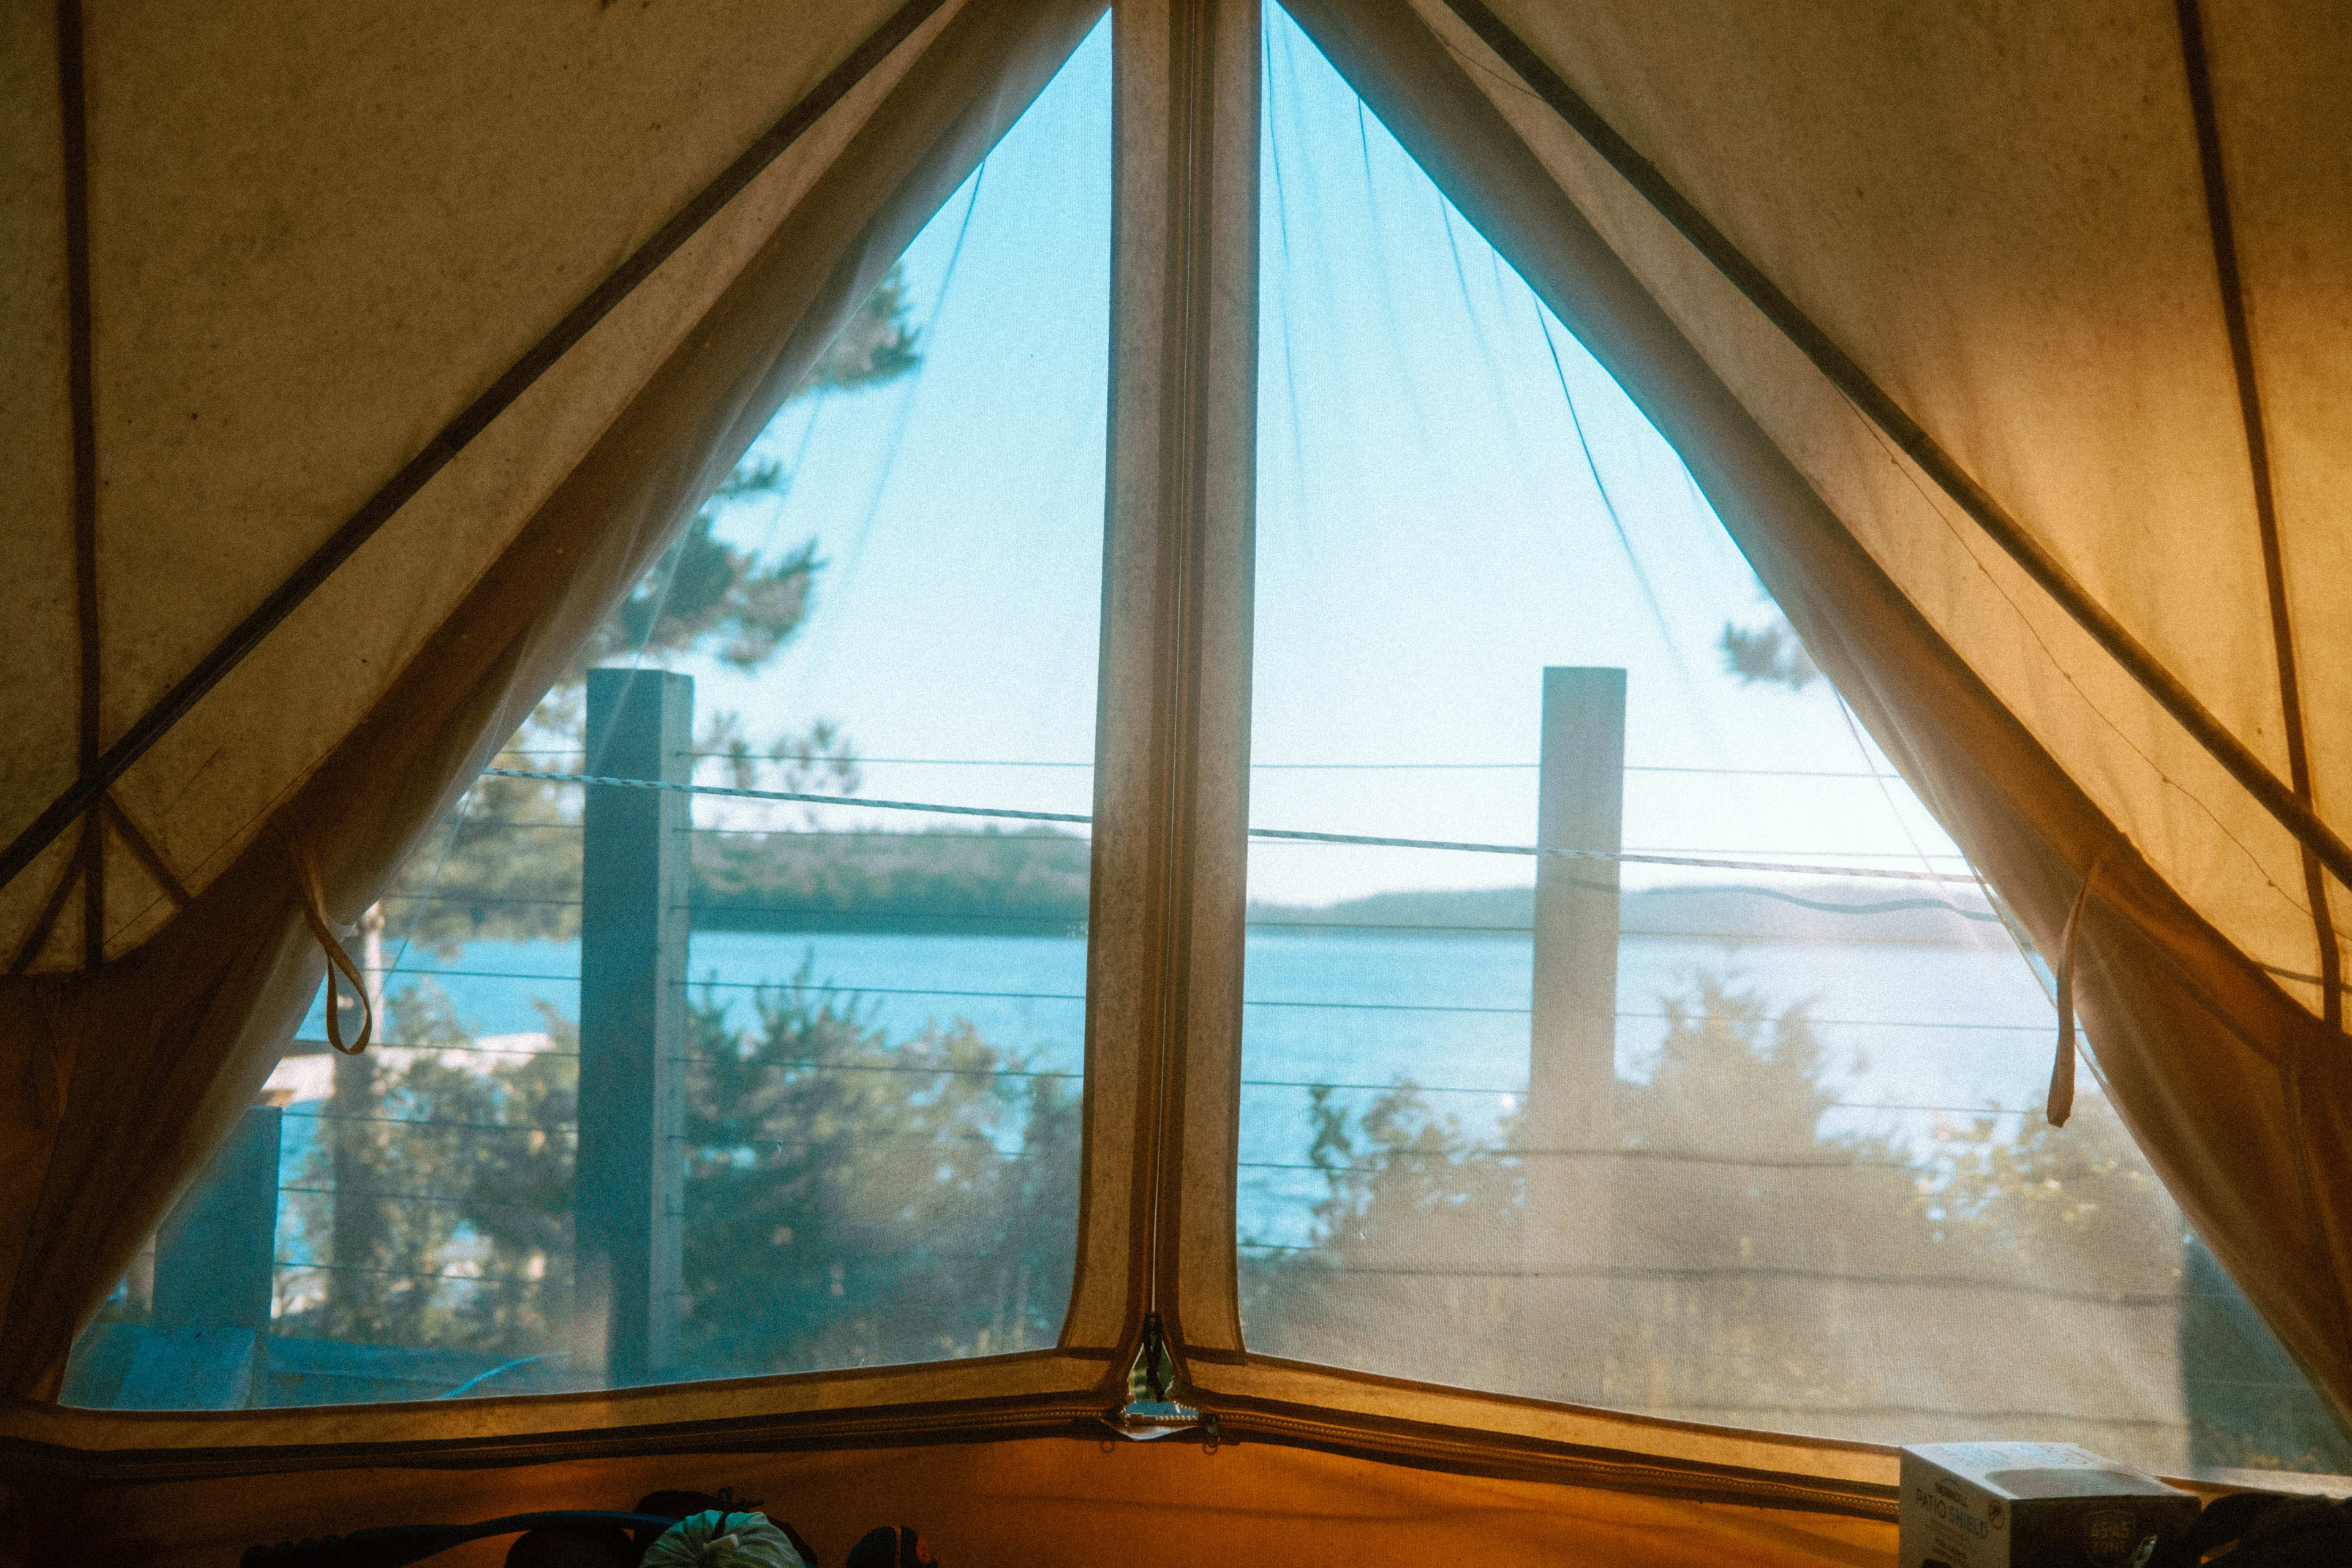 Views from within the glamping tent